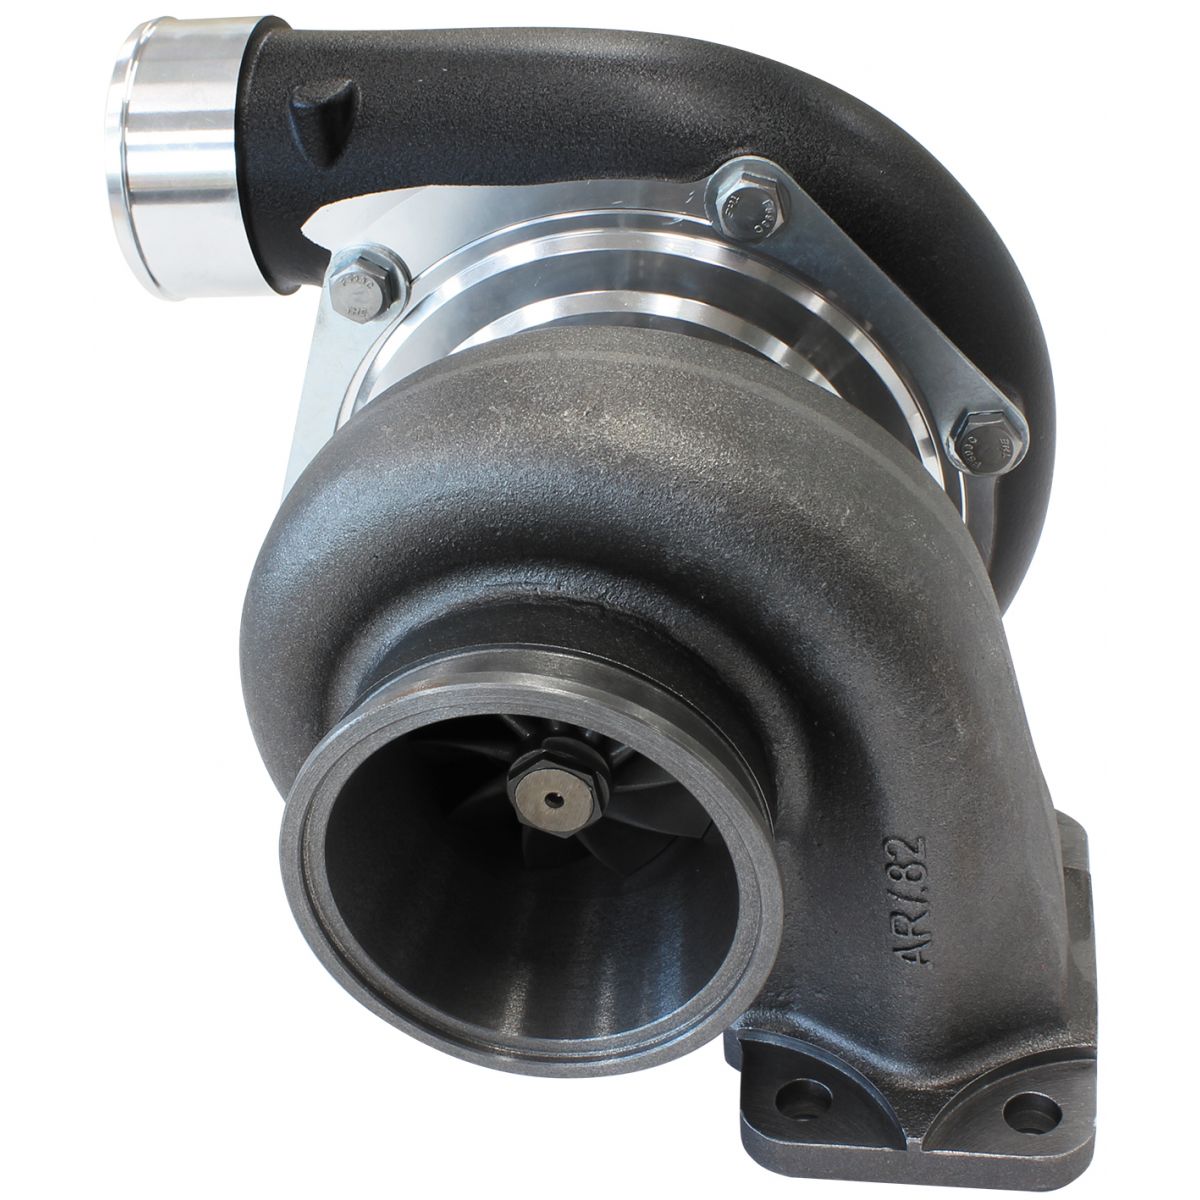 Aeroflow Boosted - 6662 Turbocharger (BLACK)